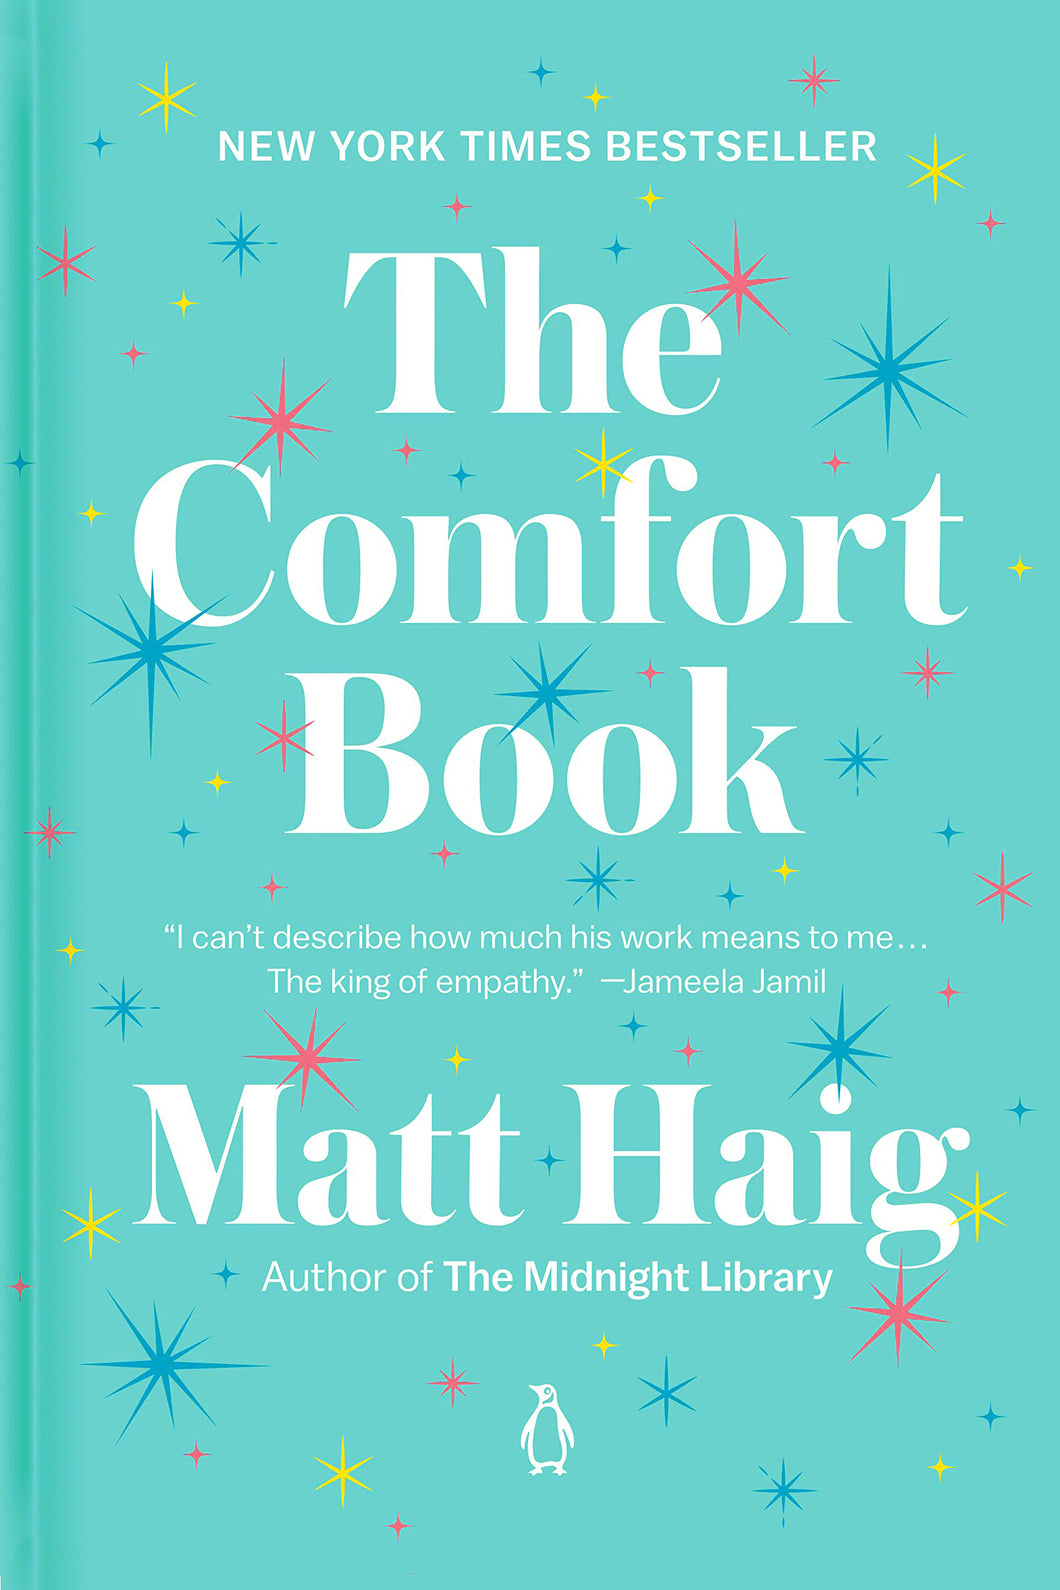 The Comfort Book by Matt Haig / Hardcover - NEW BOOK OR BOOK BOX